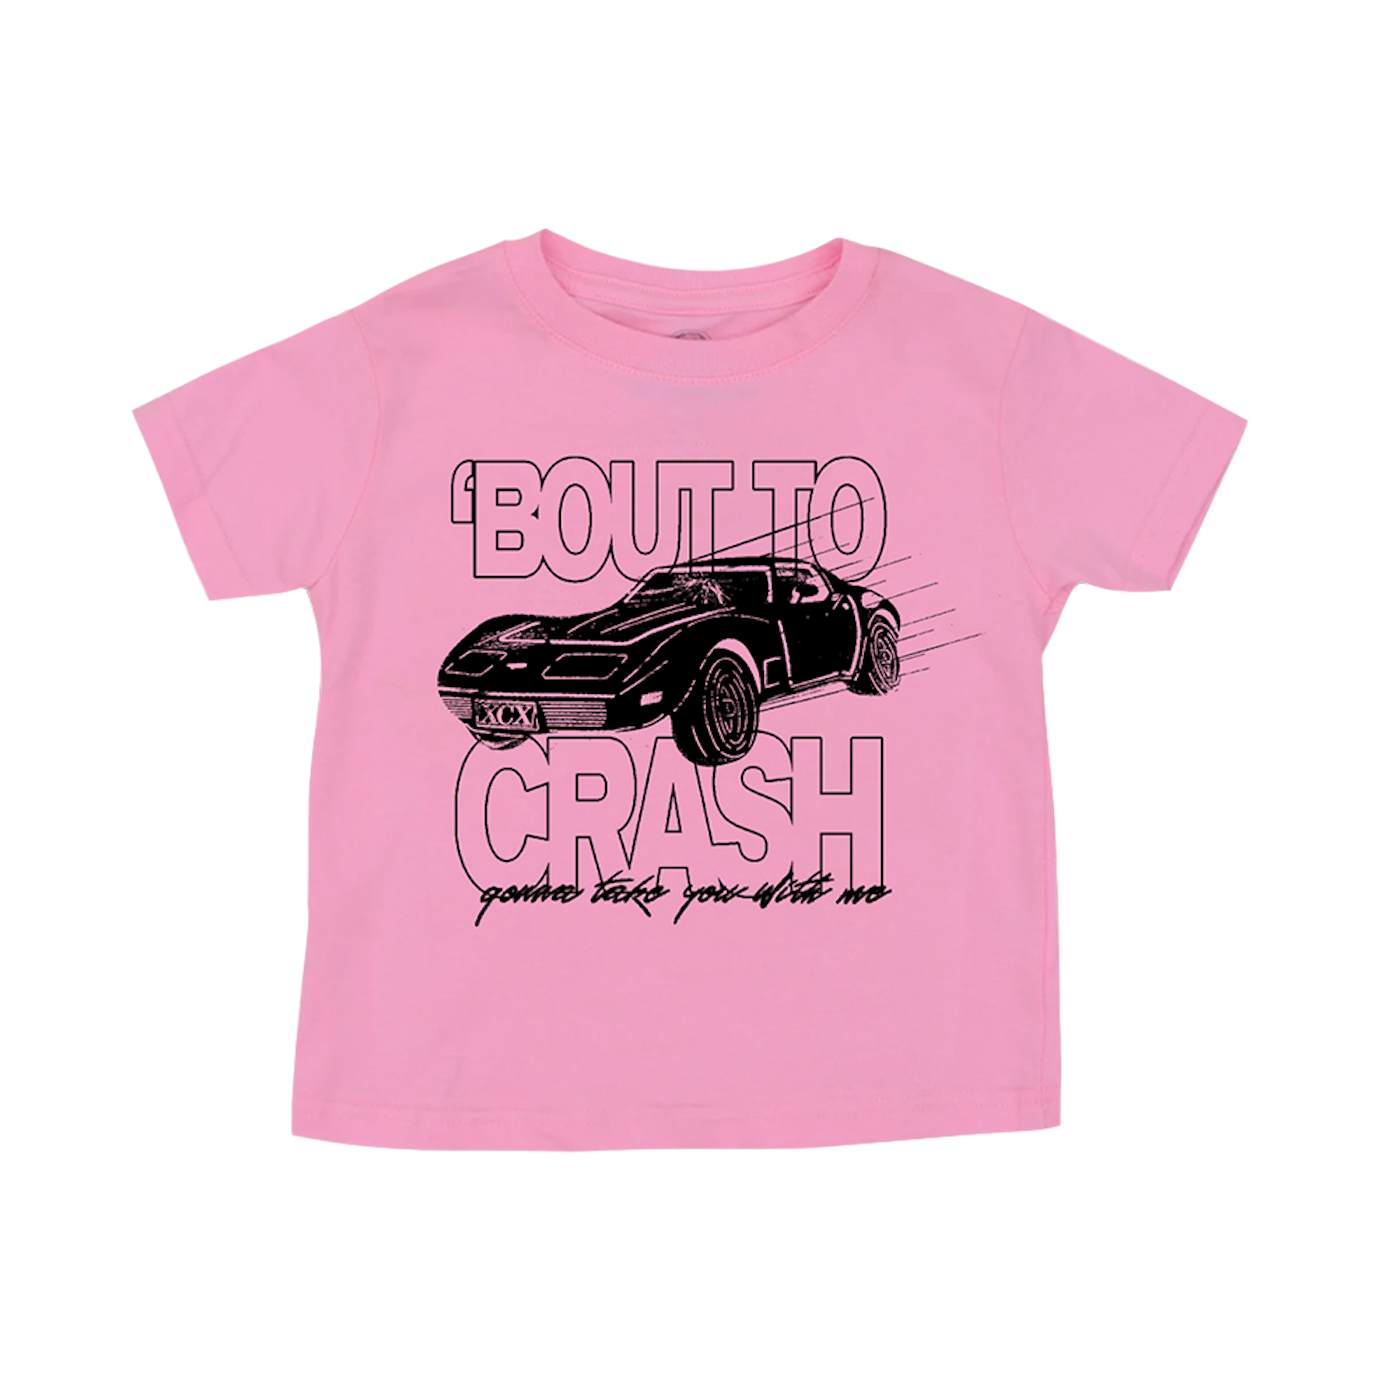 Charli XCX Bout to Crash Pink Cropped Tee